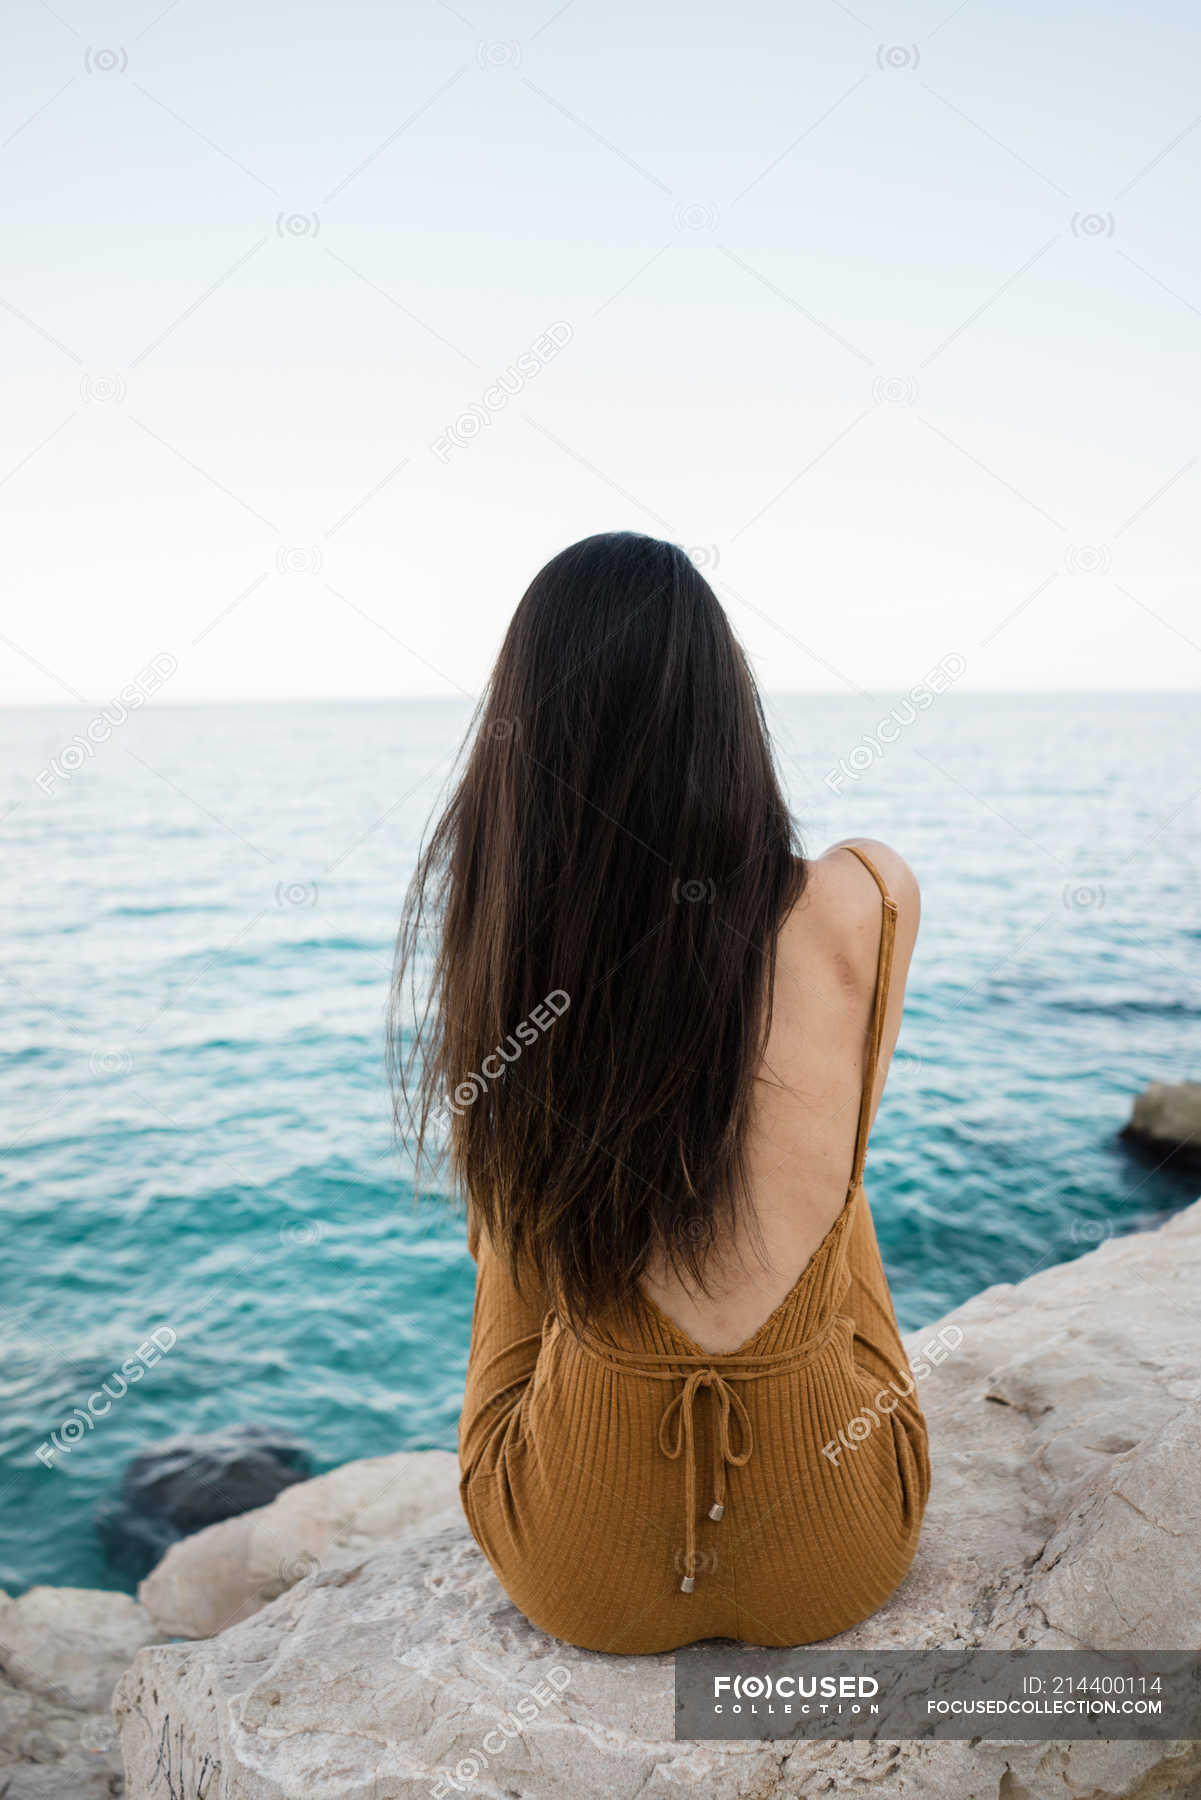 Rear view of woman with long hair sitting on rocky shoreline — style, Black  Hair - Stock Photo | #214400114